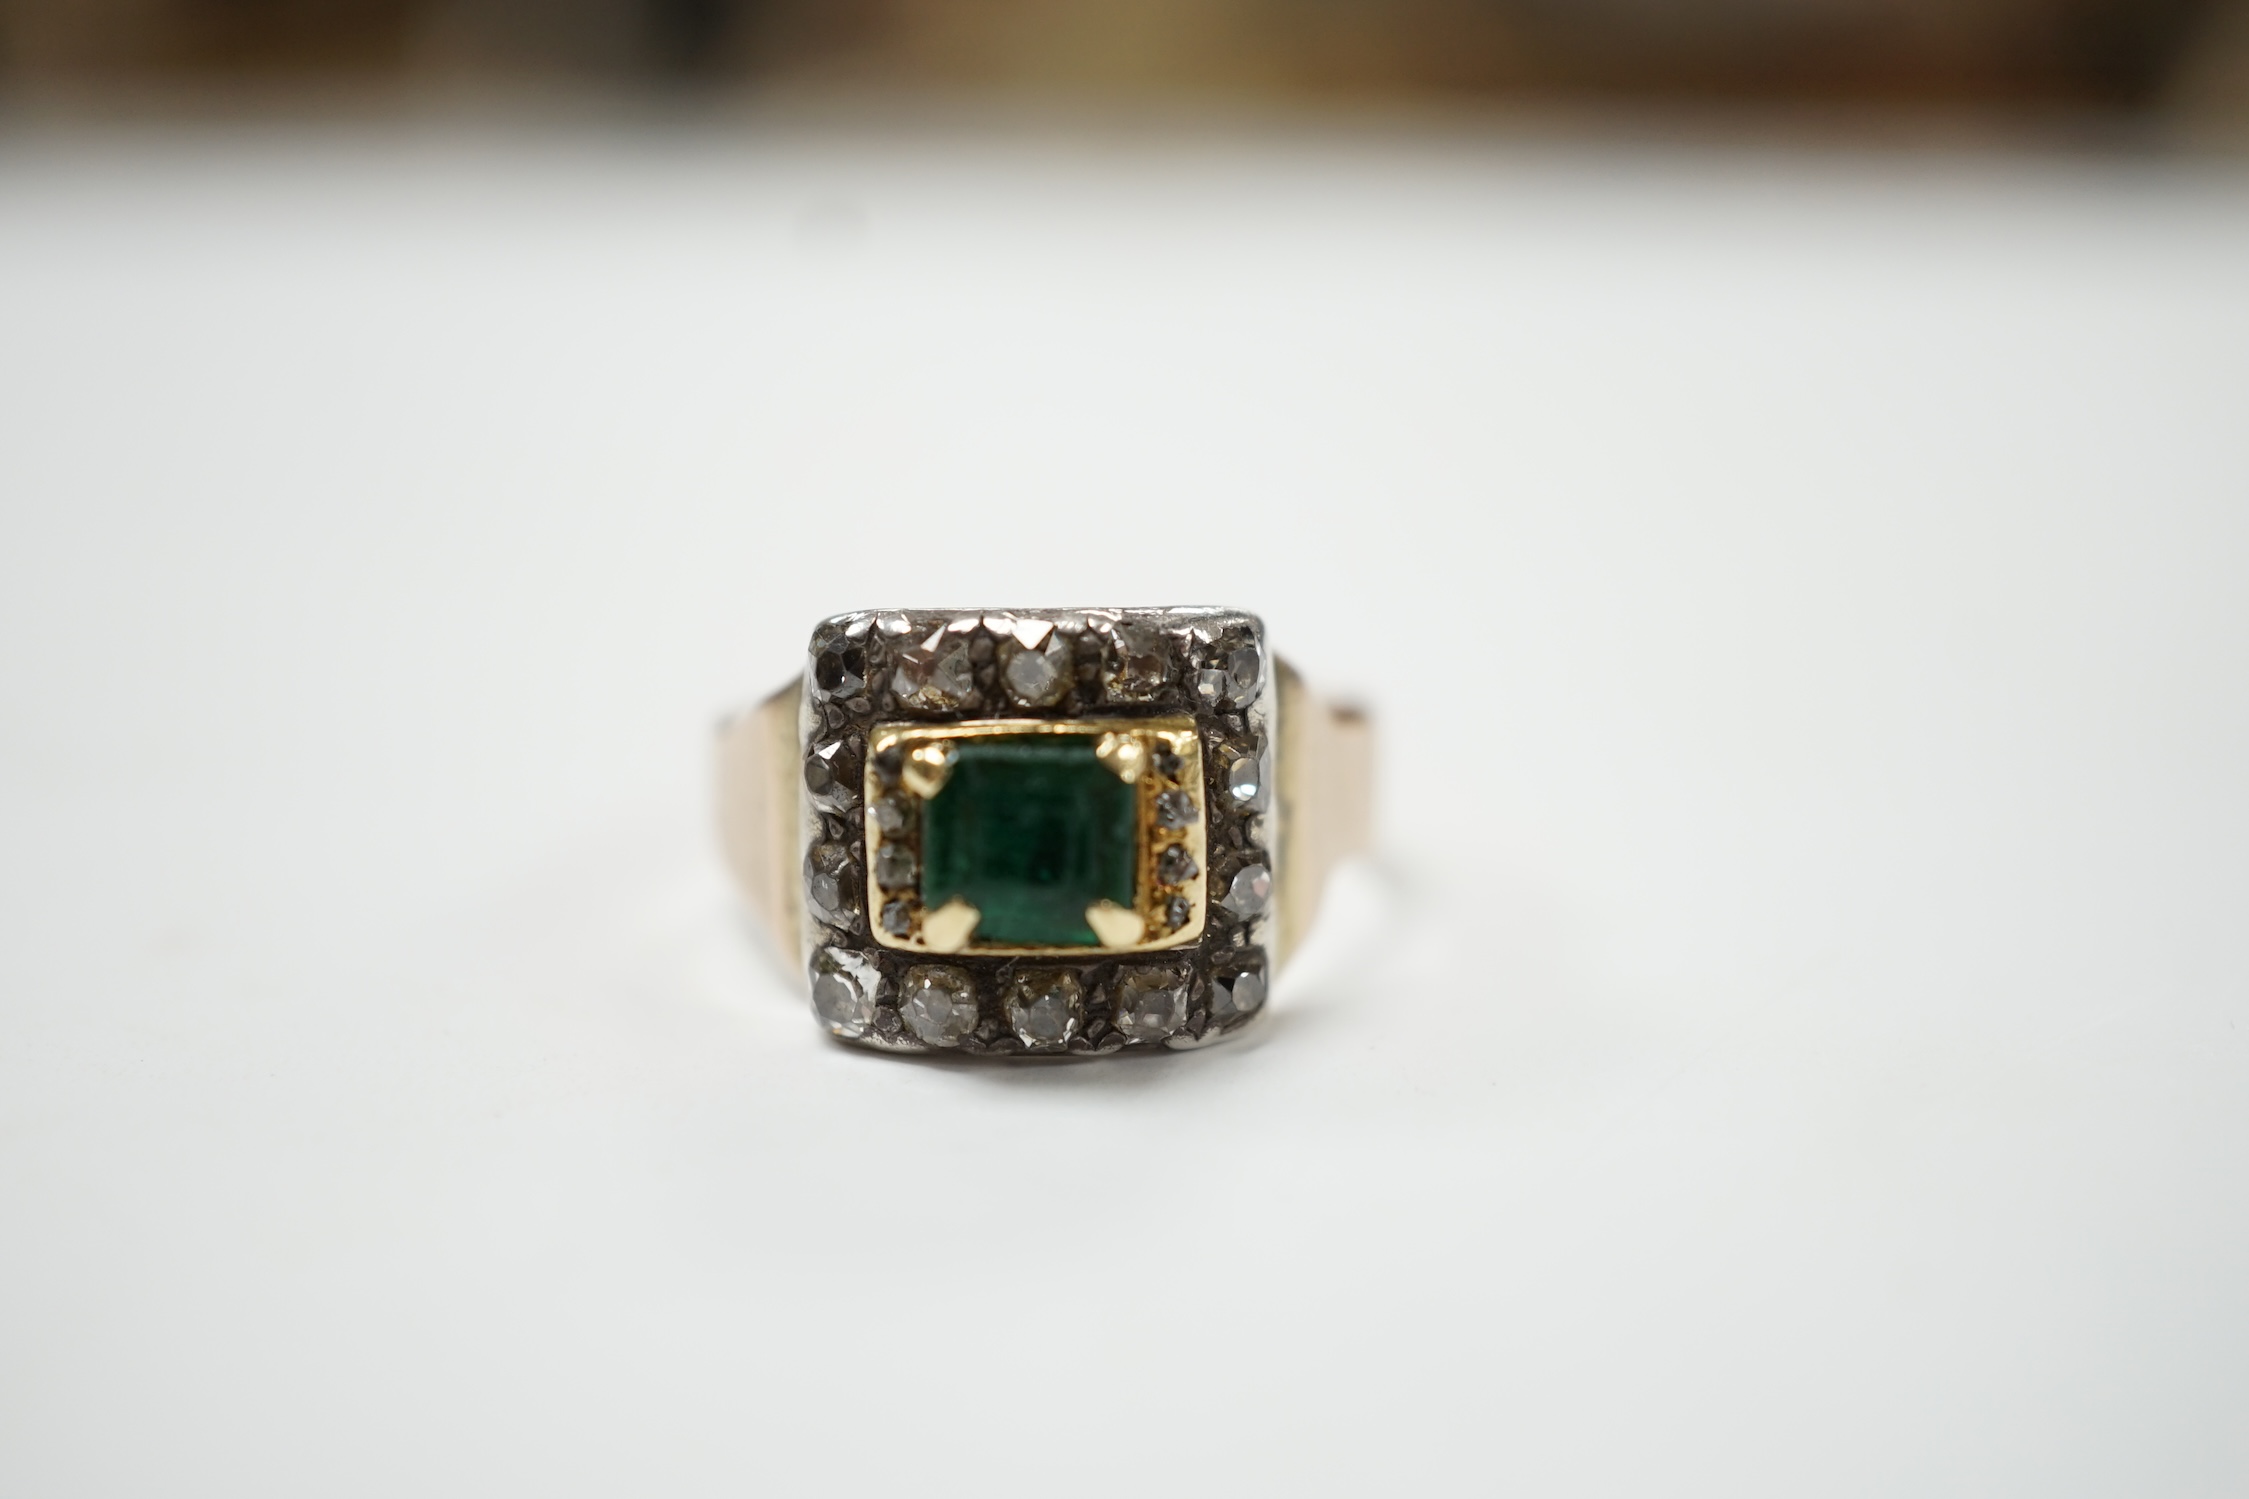 A George III 18ct, emerald and diamond cluster set mourning ring, with engraved inscription, 'H. Goodwin? died 18th Jan, 1790, aged 63', size S, gross weight 5.5 grams. Condition - fair